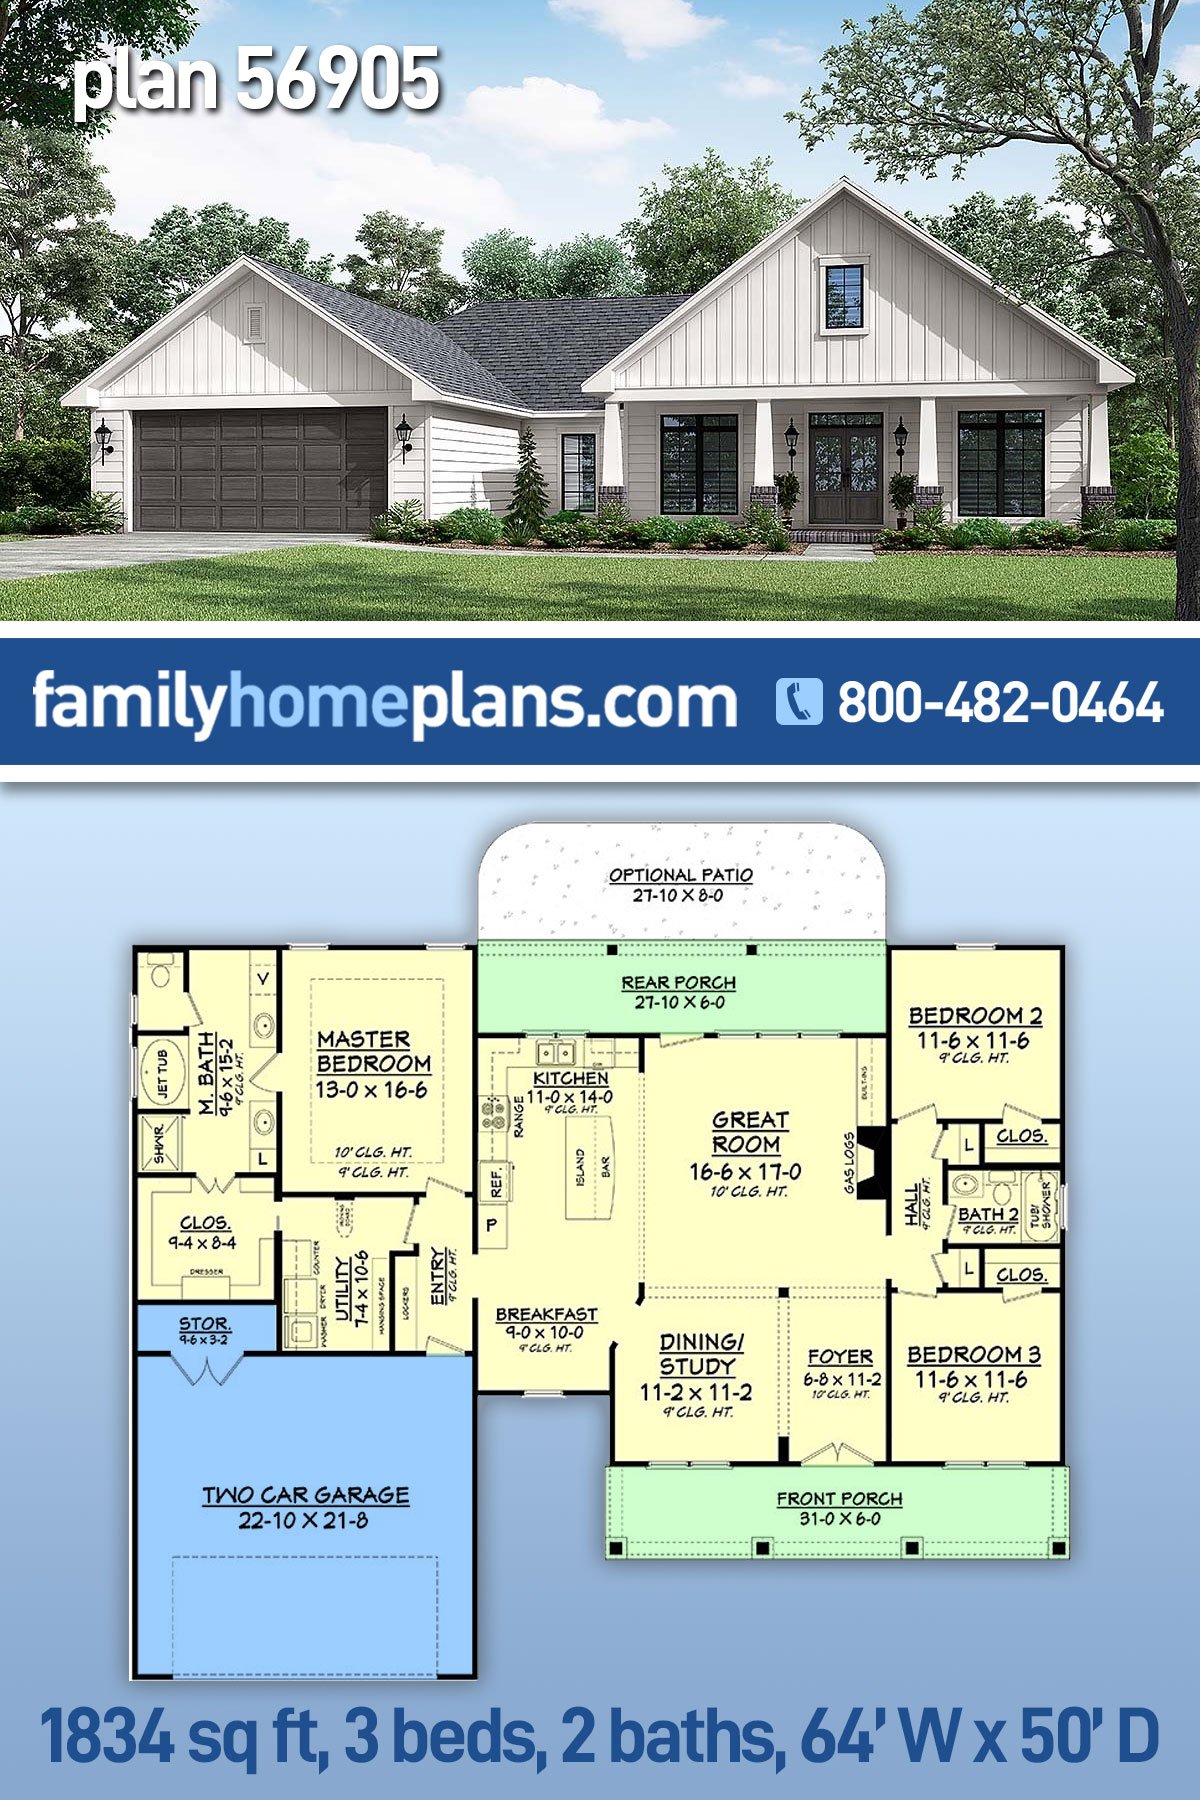 Plan 56905 | Country House Plans with Inviting Front Porch, 1834